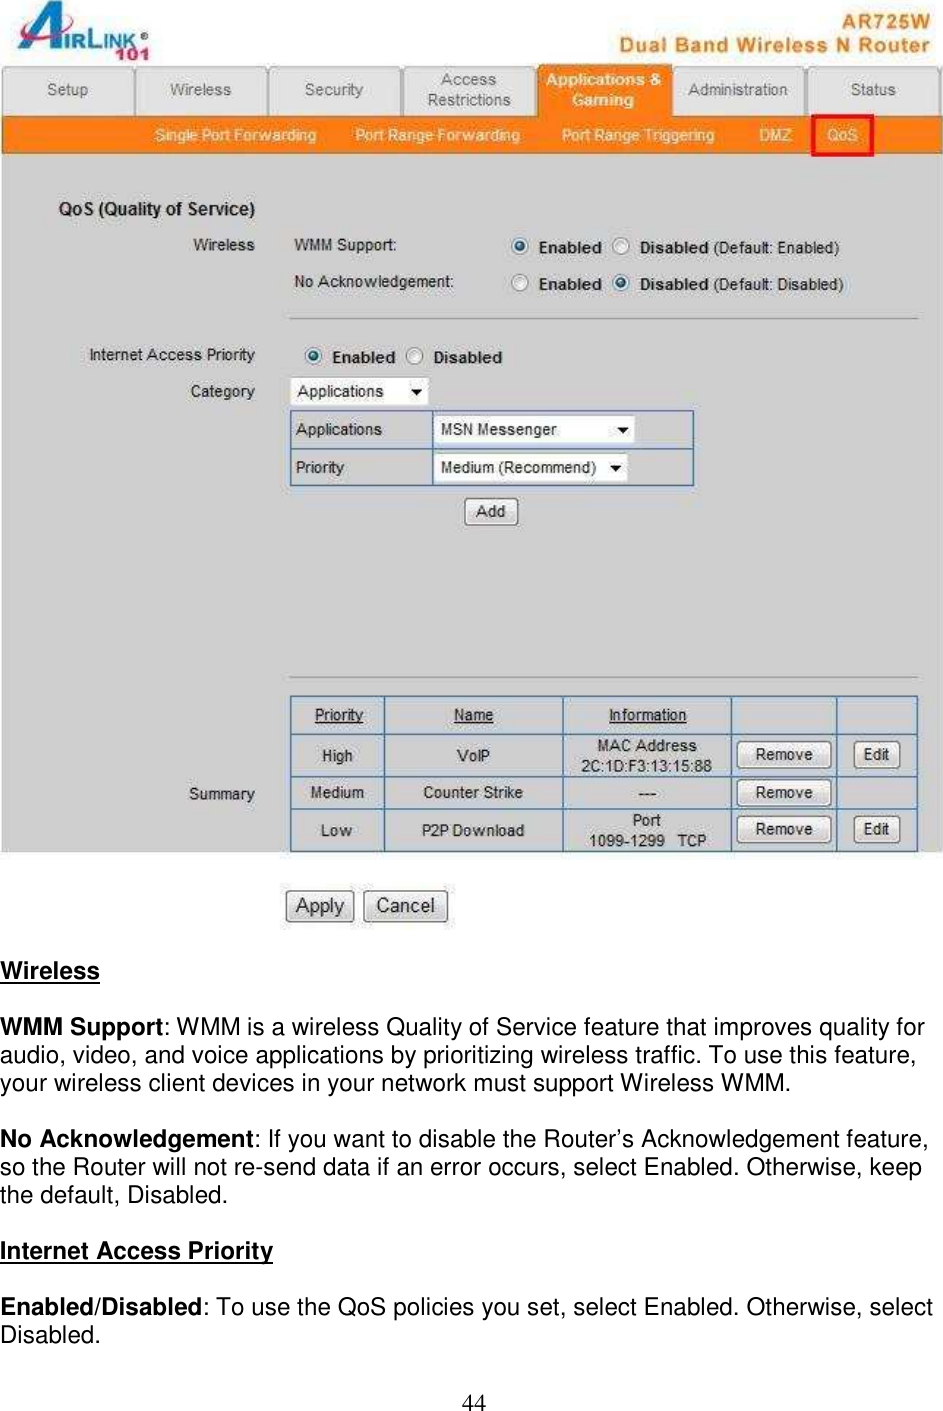 44   Wireless  WMM Support: WMM is a wireless Quality of Service feature that improves quality for audio, video, and voice applications by prioritizing wireless traffic. To use this feature, your wireless client devices in your network must support Wireless WMM.  No Acknowledgement: If you want to disable the Router’s Acknowledgement feature, so the Router will not re-send data if an error occurs, select Enabled. Otherwise, keep the default, Disabled.  Internet Access Priority  Enabled/Disabled: To use the QoS policies you set, select Enabled. Otherwise, select Disabled.  